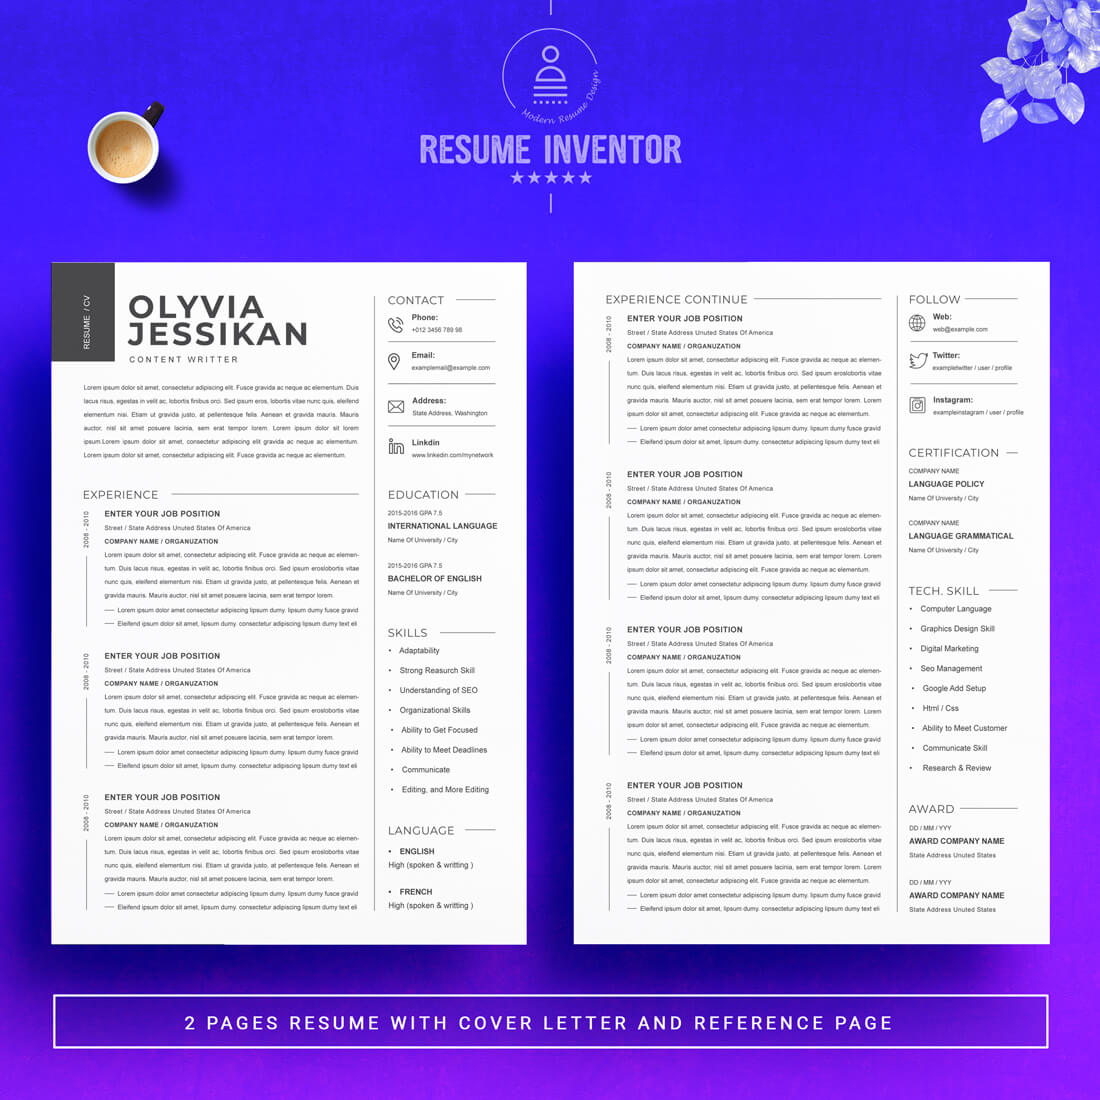 Content Writter Resume Template | Professional CV Template Design preview image.